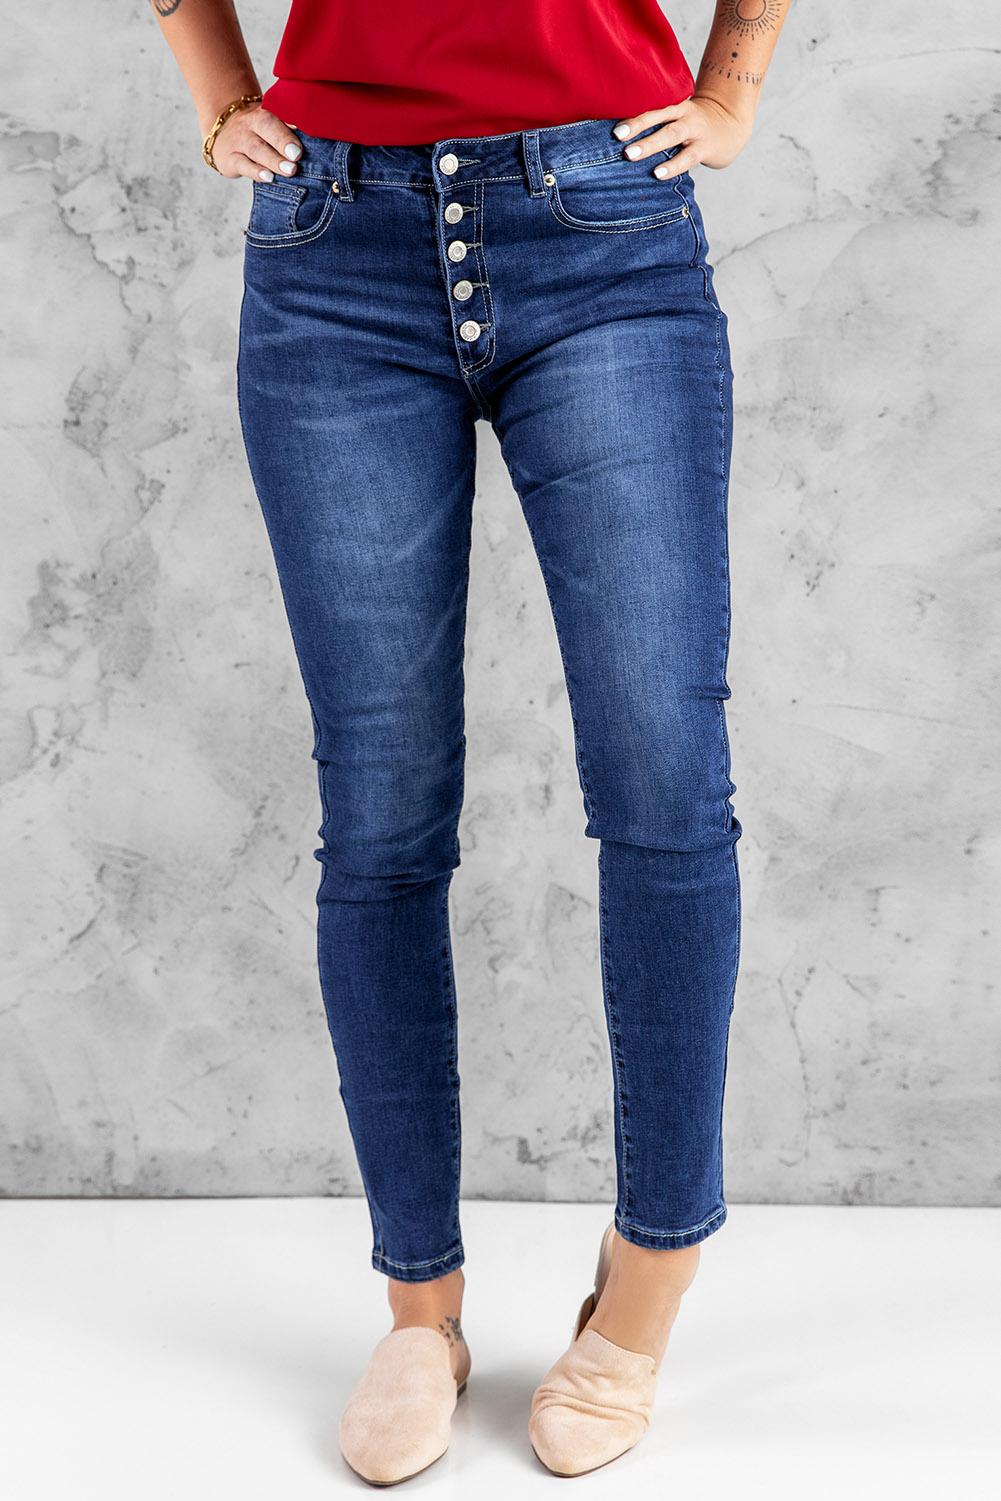 Wholesale Dark Blue Casual Button Fly High Rise SKINNY JEANS